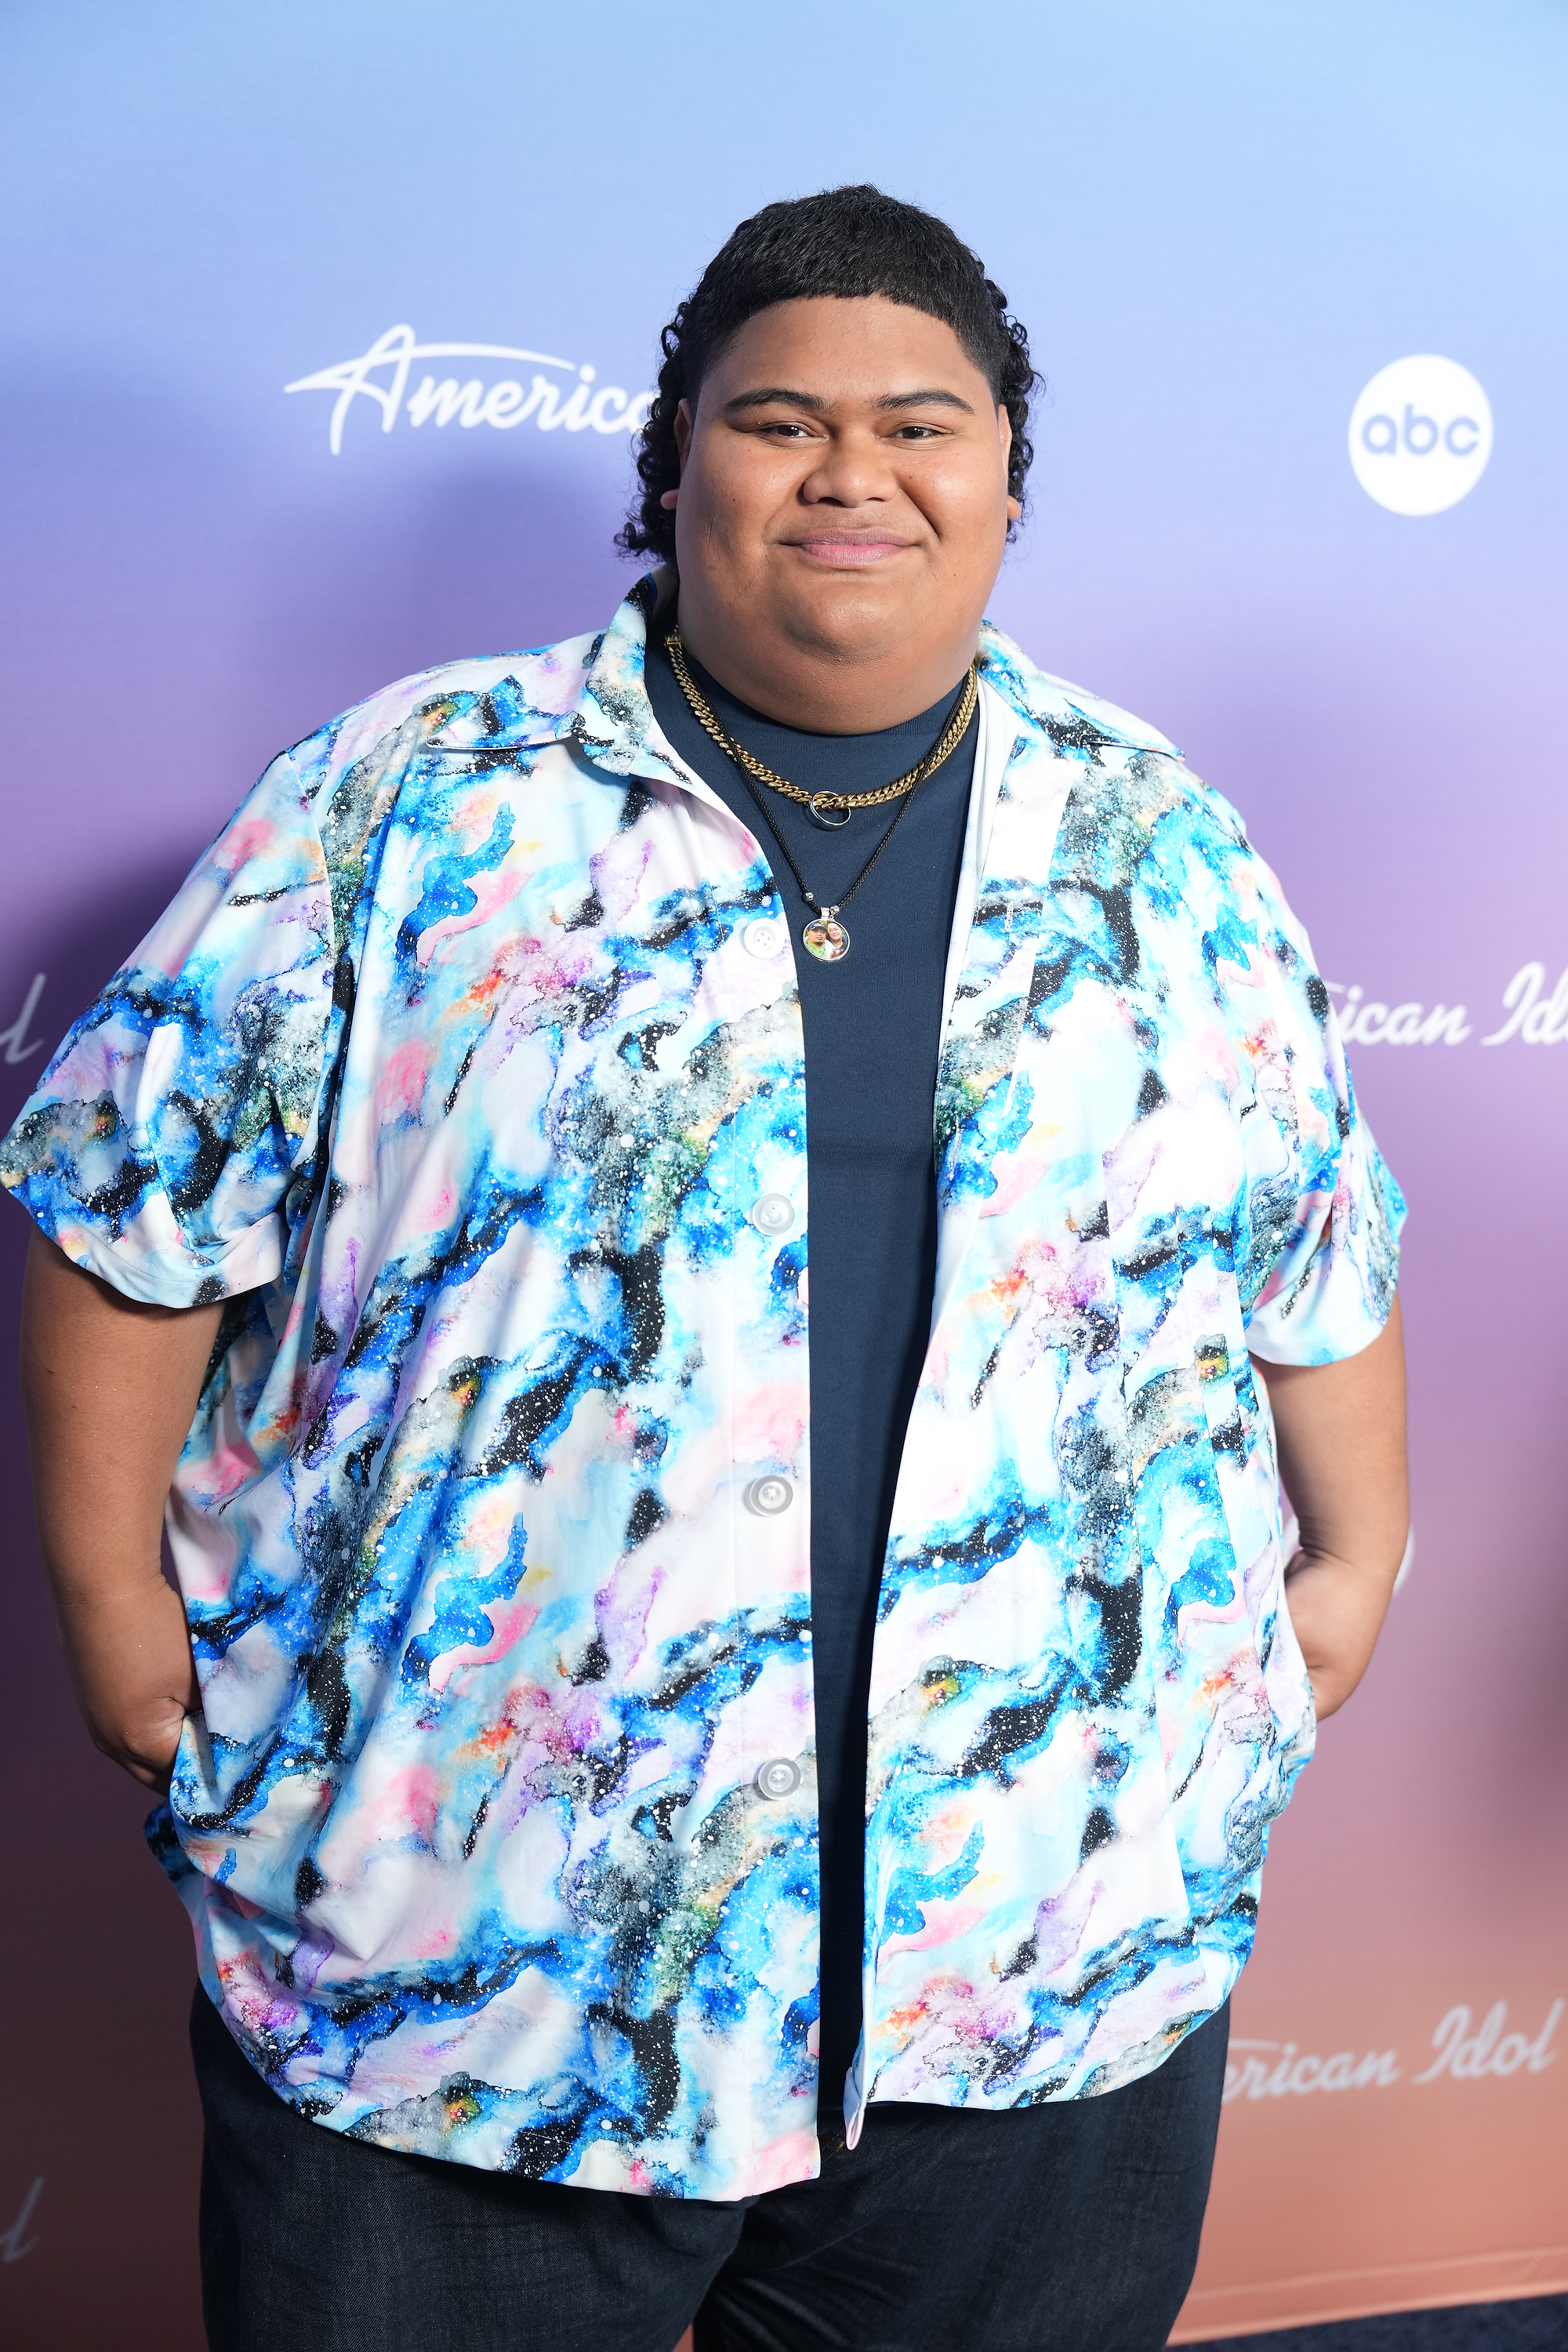 Iam Tongi at the Disneyland Resort on May 14, 2023, in California. | Source: Getty Images